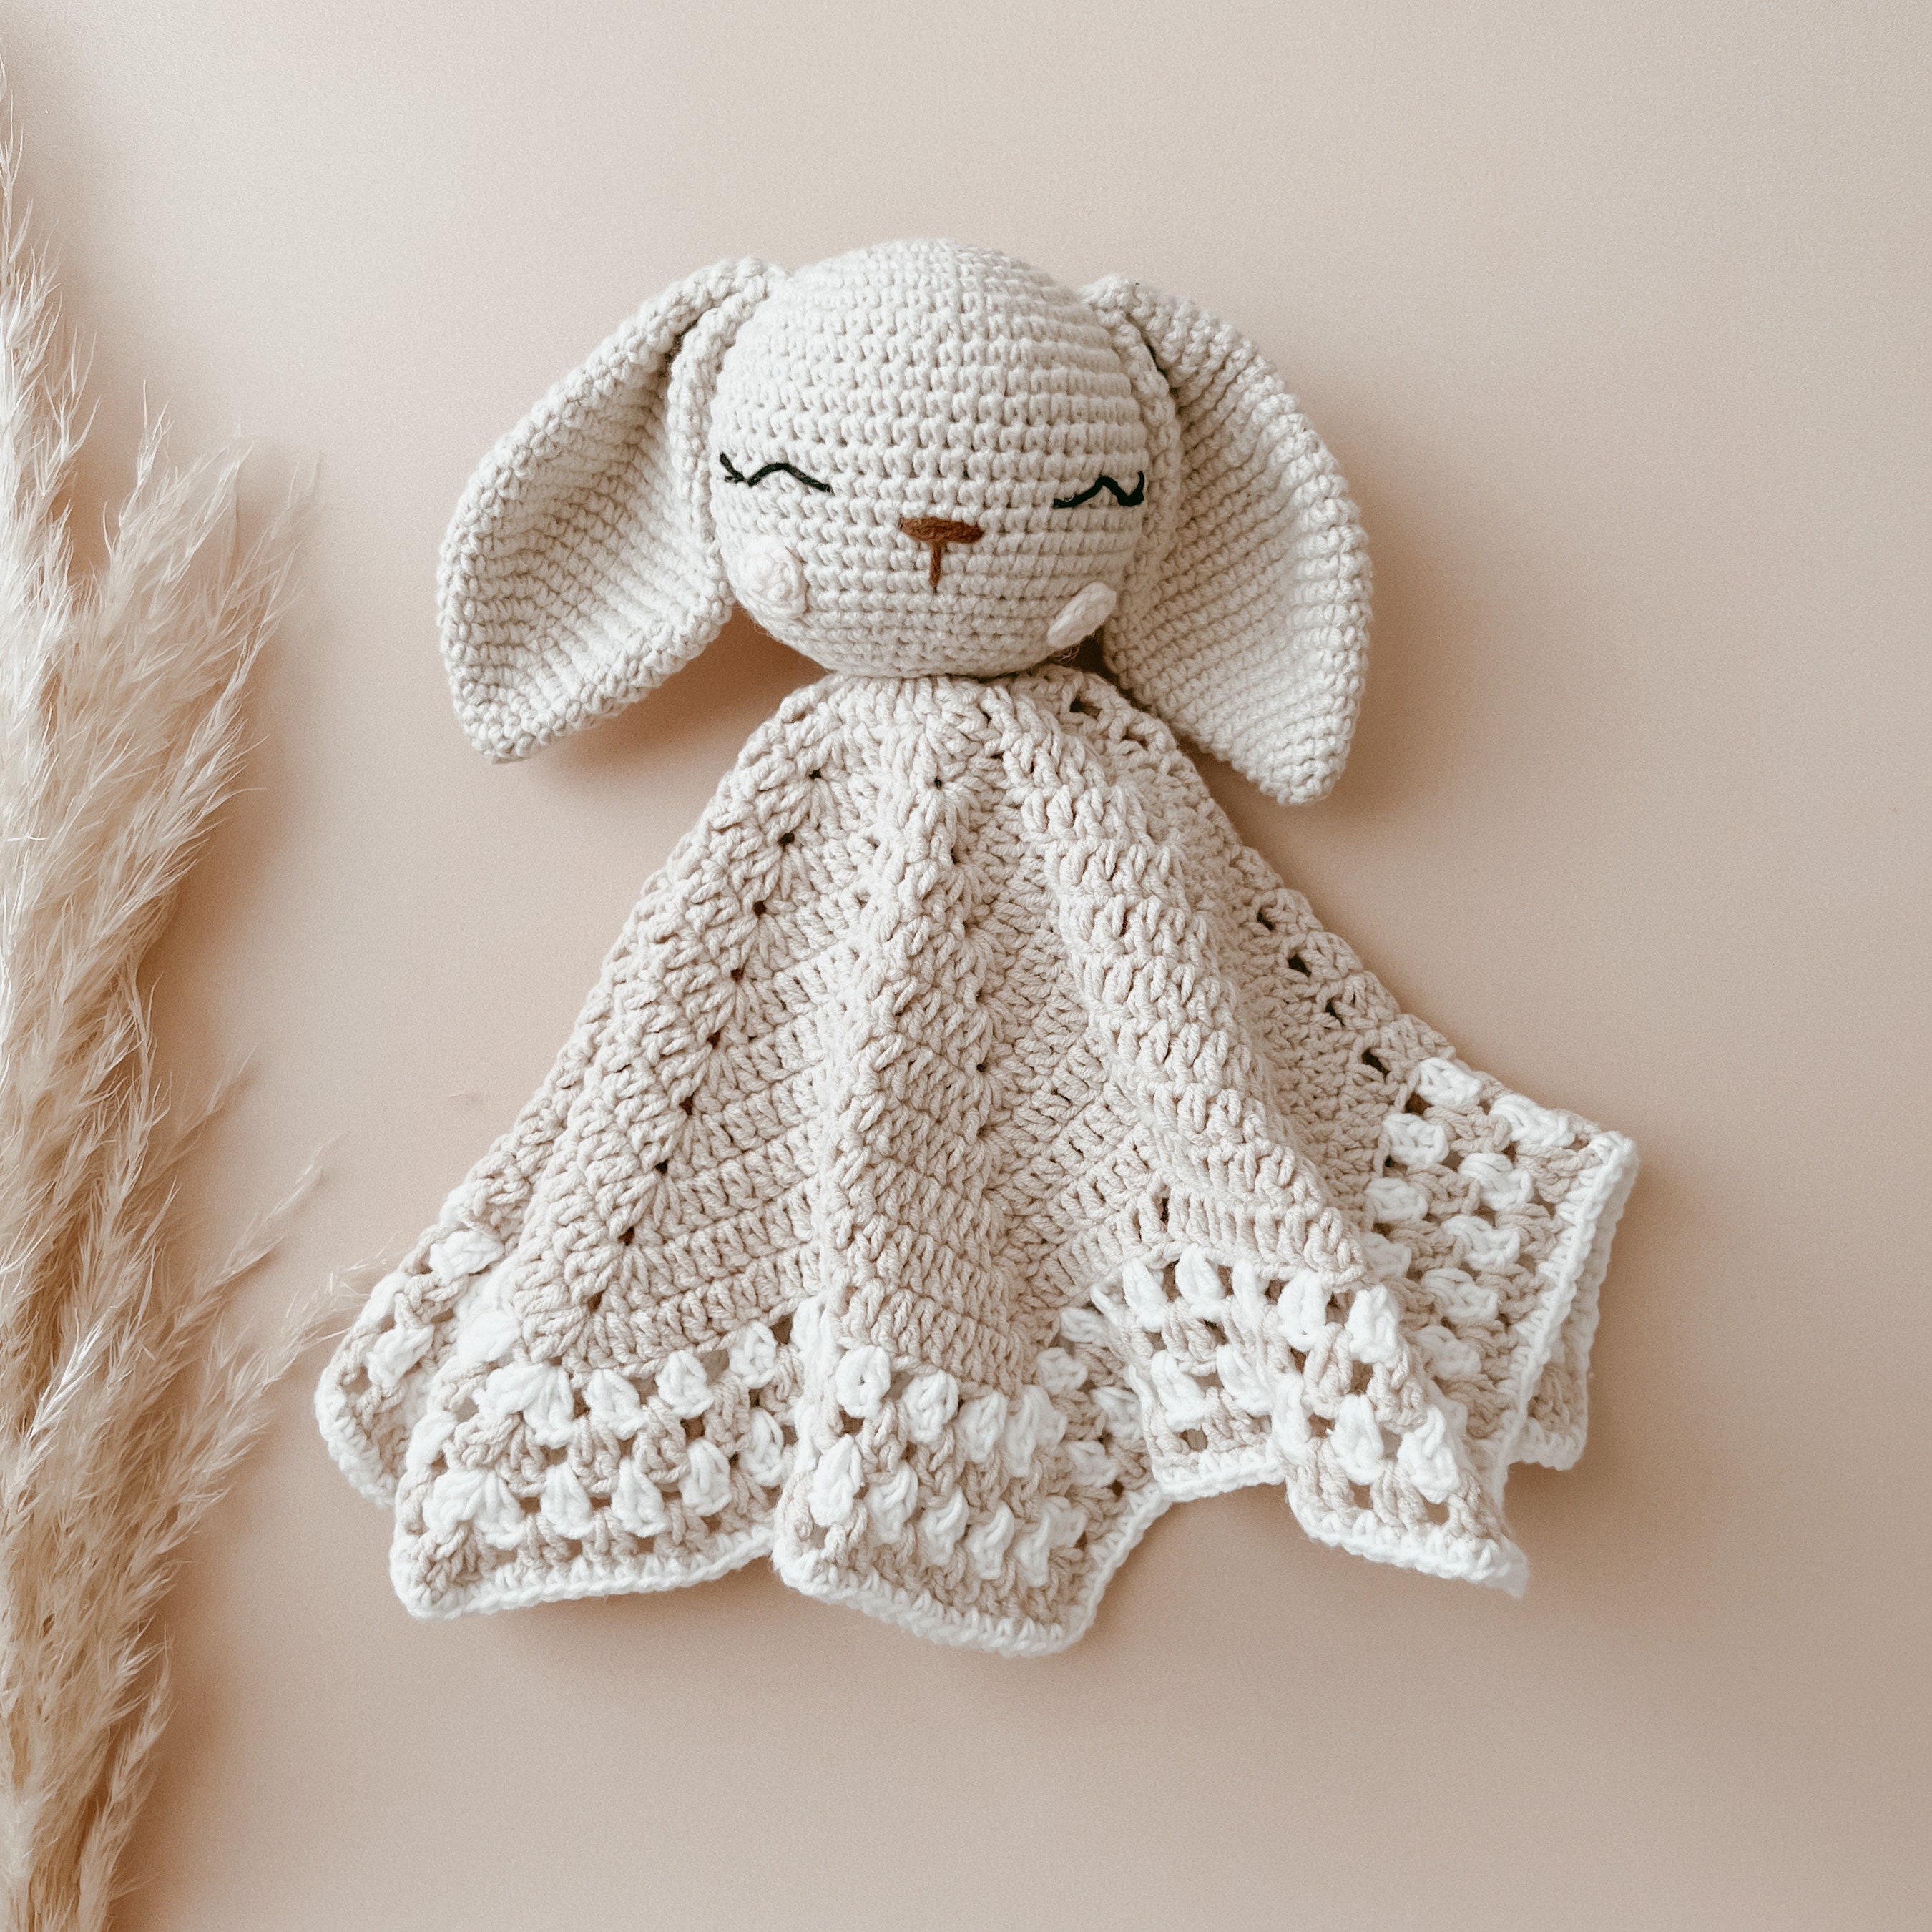 Home & Living :: Baby & Kids :: Crocheted Spotted Bunny Knotted Lovey